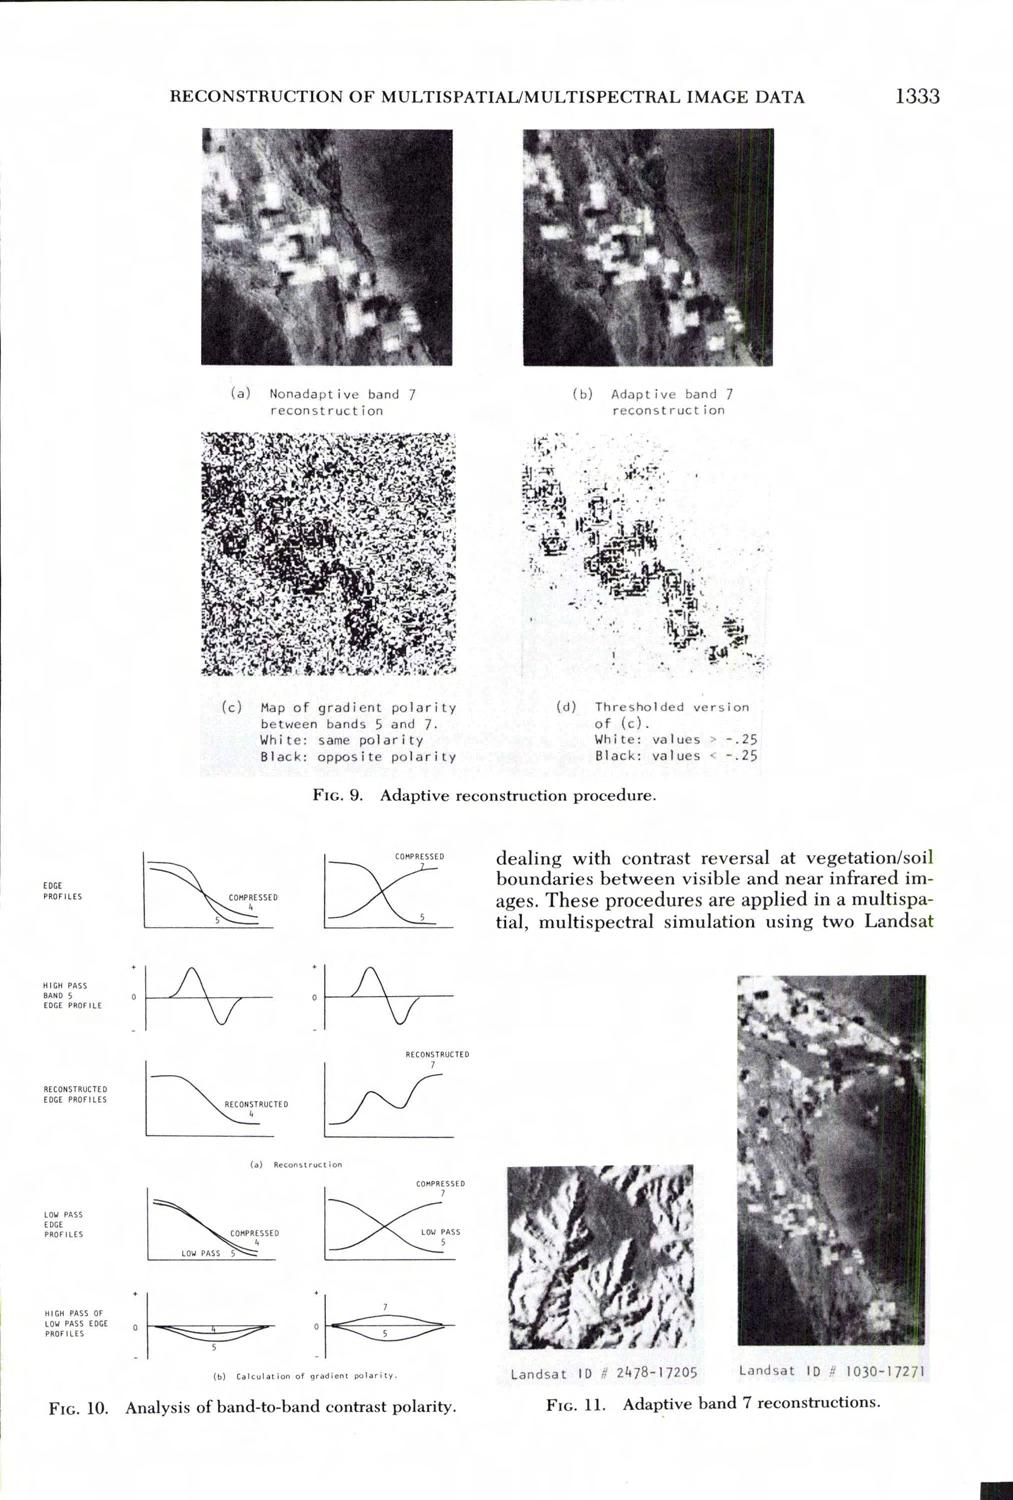 RECONSTRUCTION OF MULTISPATIAL/MULTISPECTRAL IMAGE DATA (a) Nonadaptive band 7 reconstruction (b) Adaptive band 7 reconstruction (c) Map of gradient polarity between bands 5 and 7.